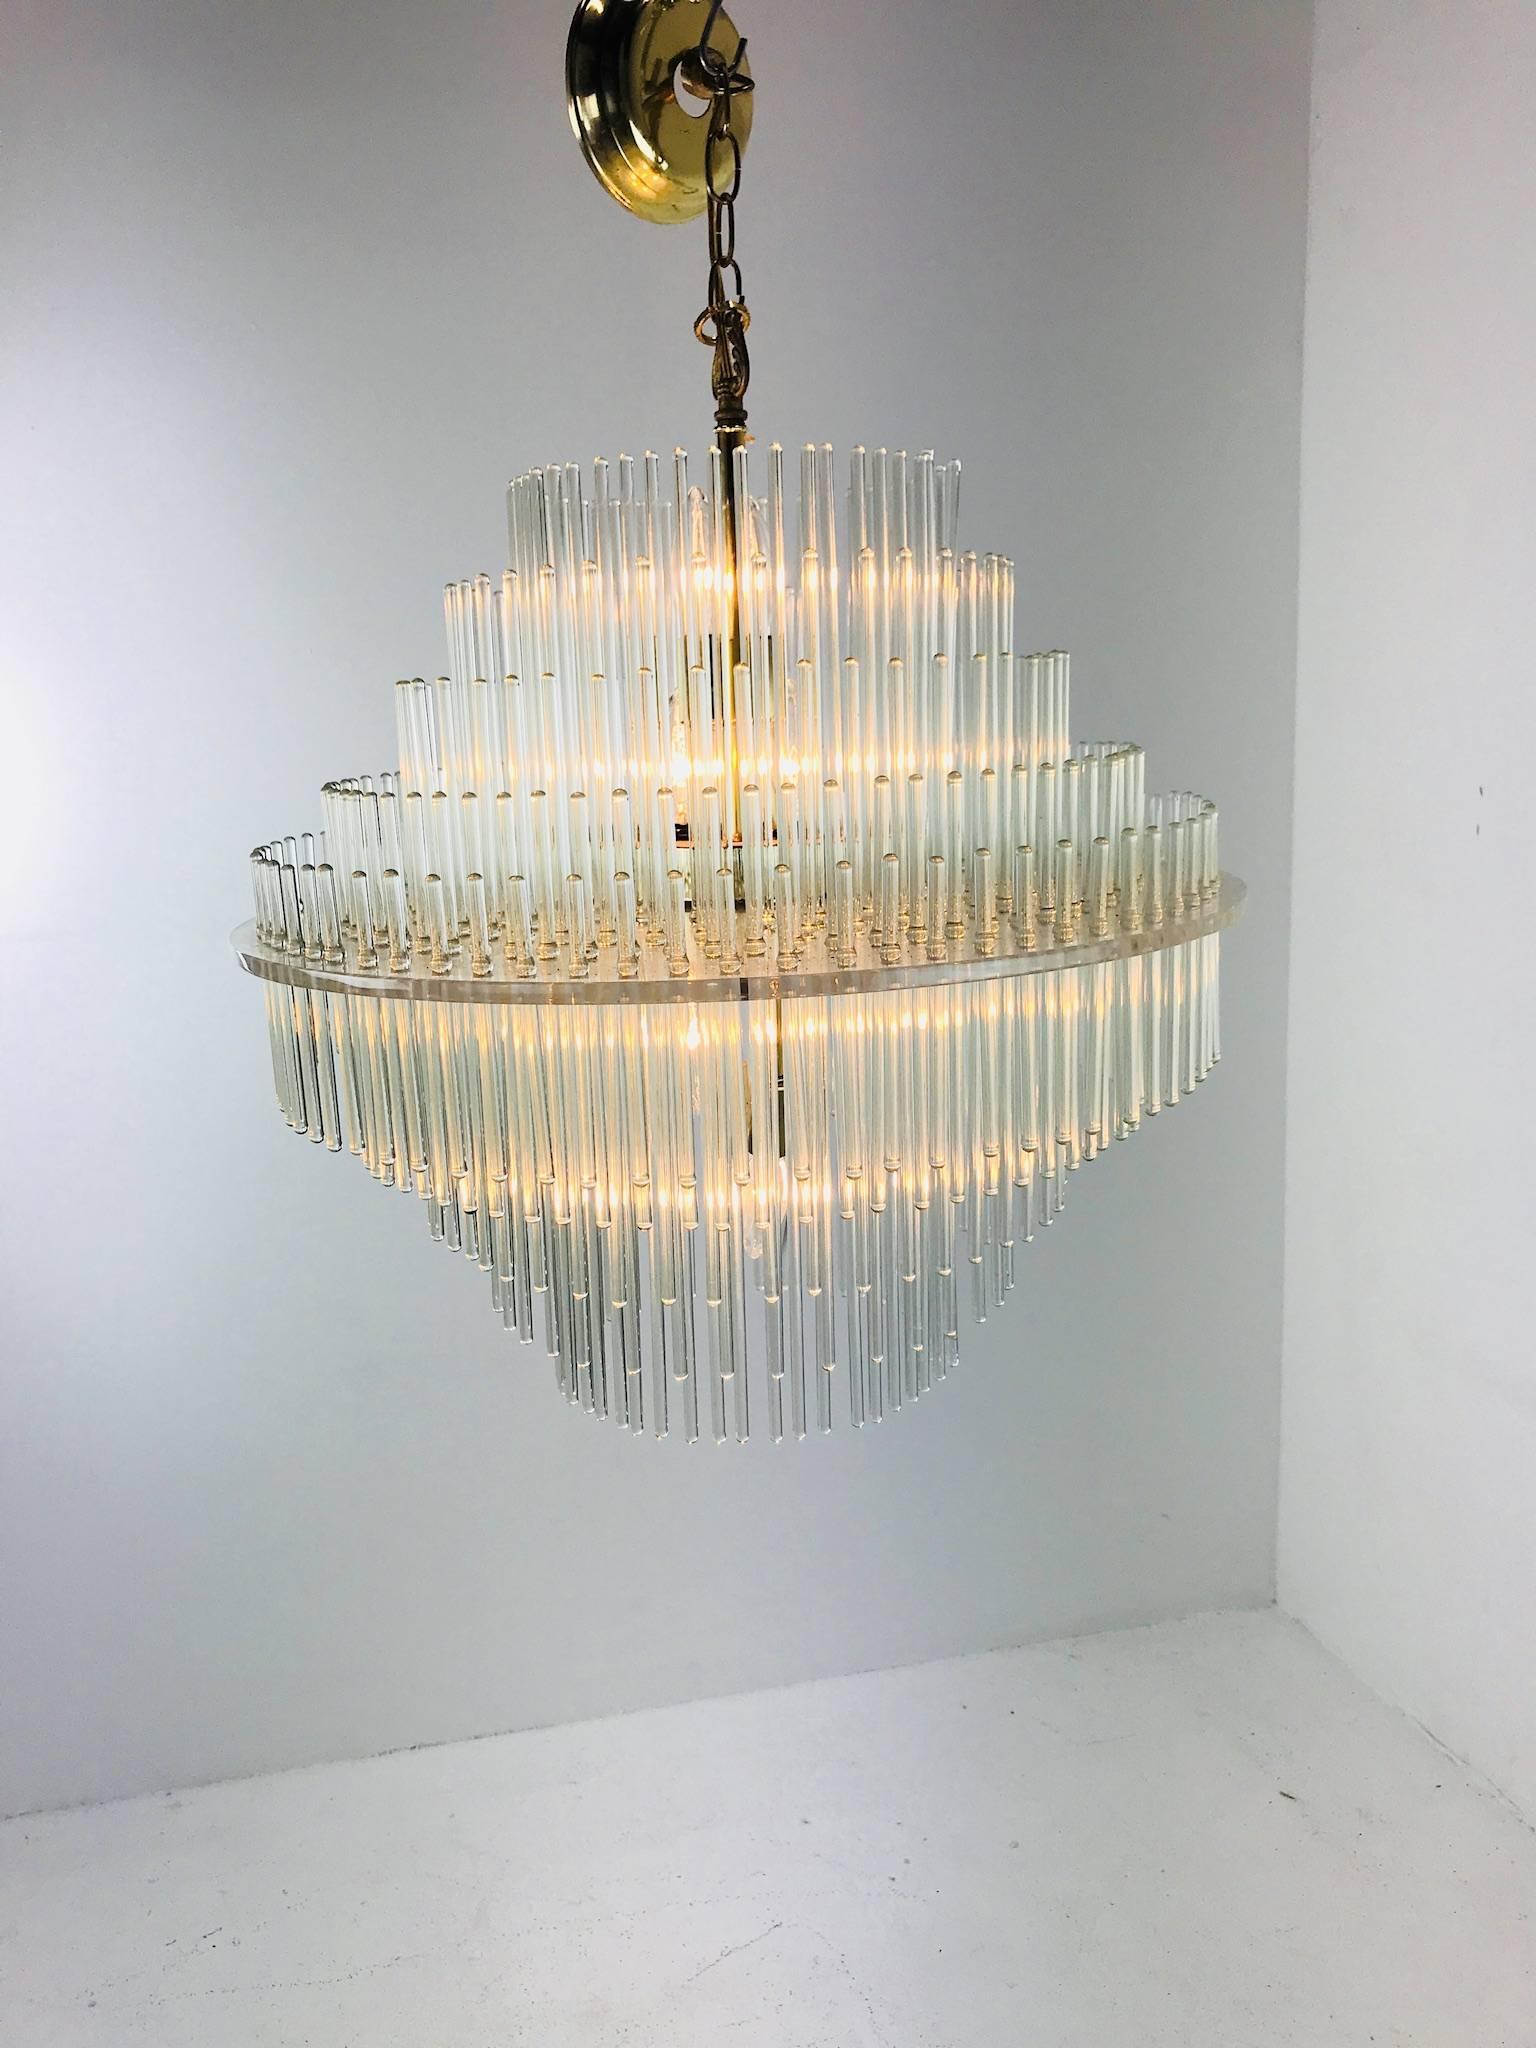 Five-tier glass rod chandelier by Sciolari for Lightolier. Chandelier shows wear from use and age. Original wiring, circa 1960s

Dimensions: 23